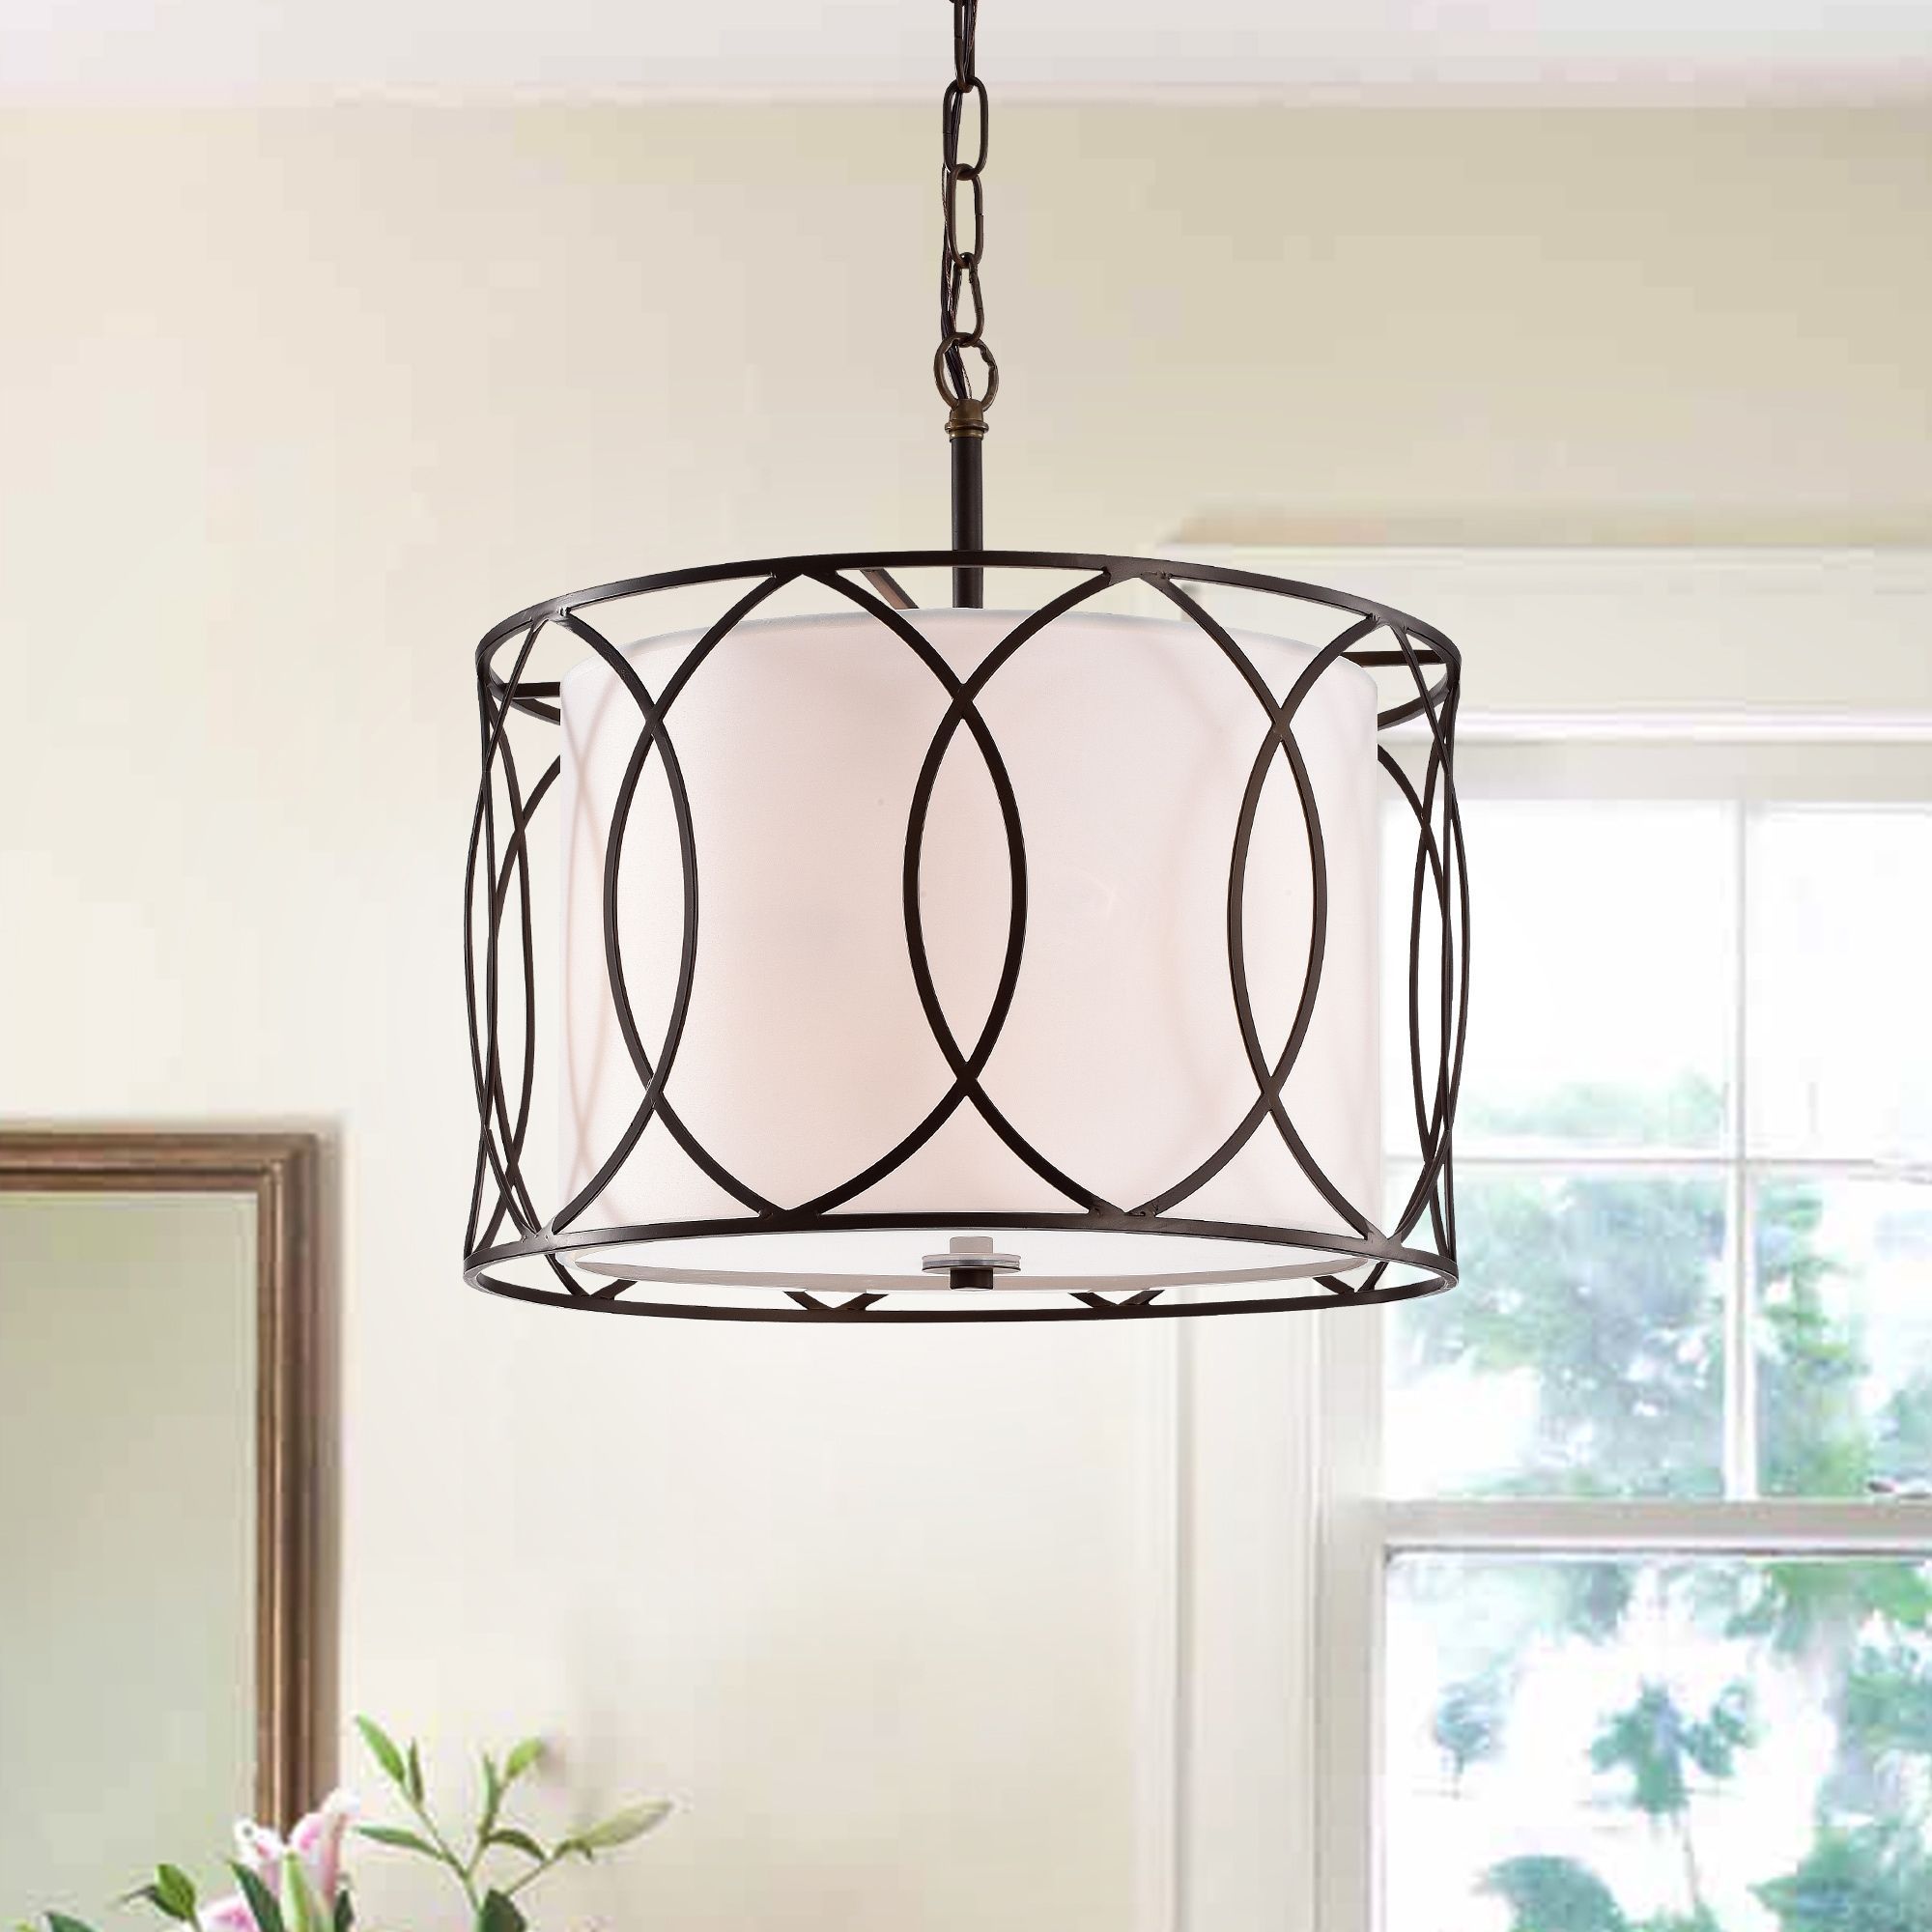 Gisnao Antique Bronze 3 Light Caged Drum 16 Inch Pendant In Within Tadwick 3 Light Single Drum Chandeliers (View 10 of 30)